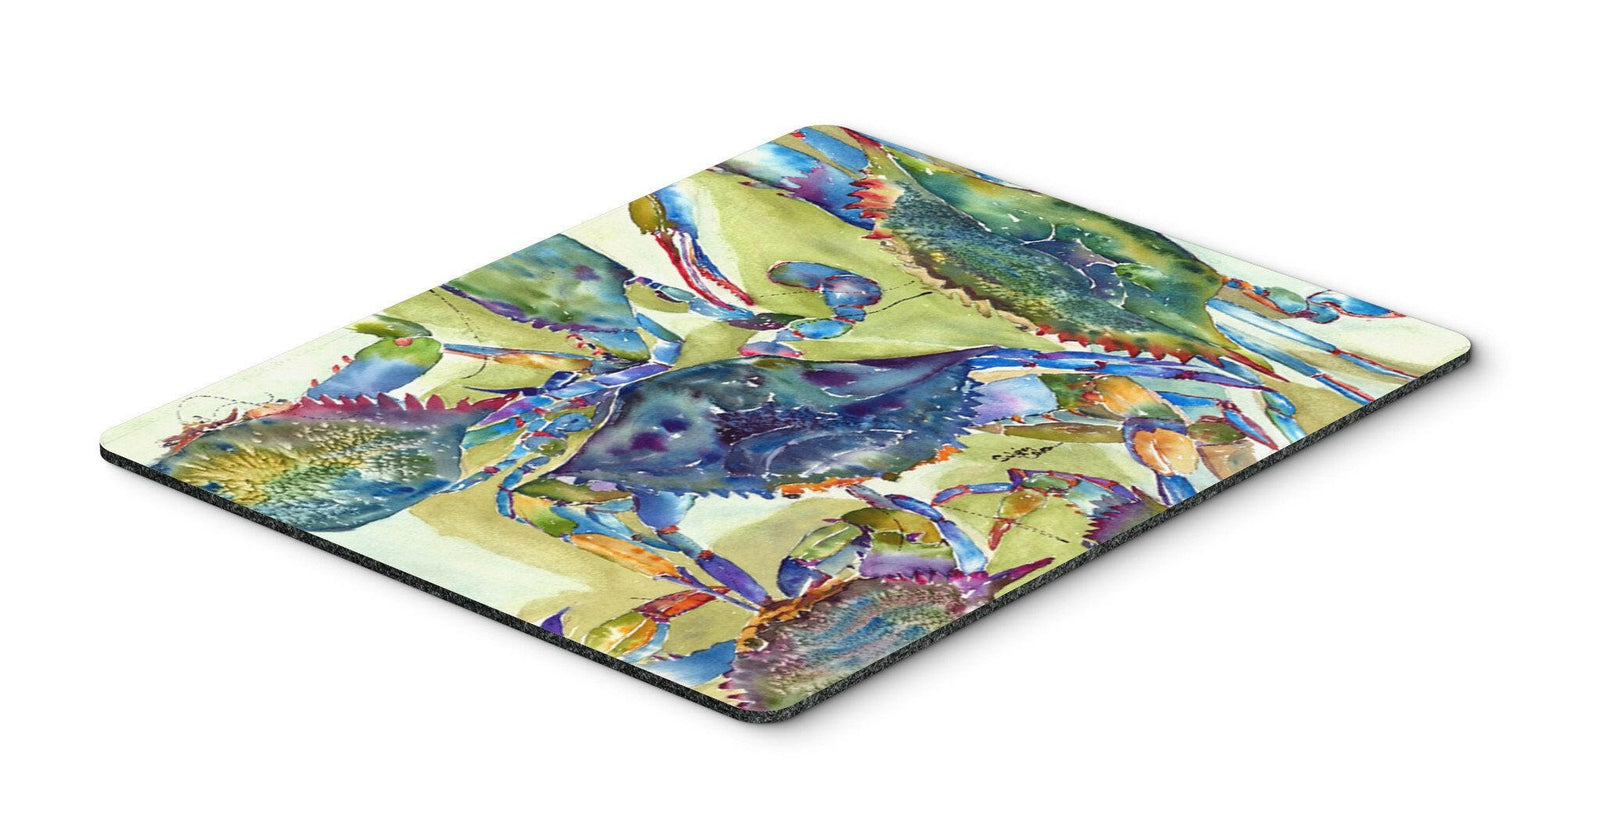 Crab All Over Mouse Pad, Hot Pad or Trivet by Caroline's Treasures